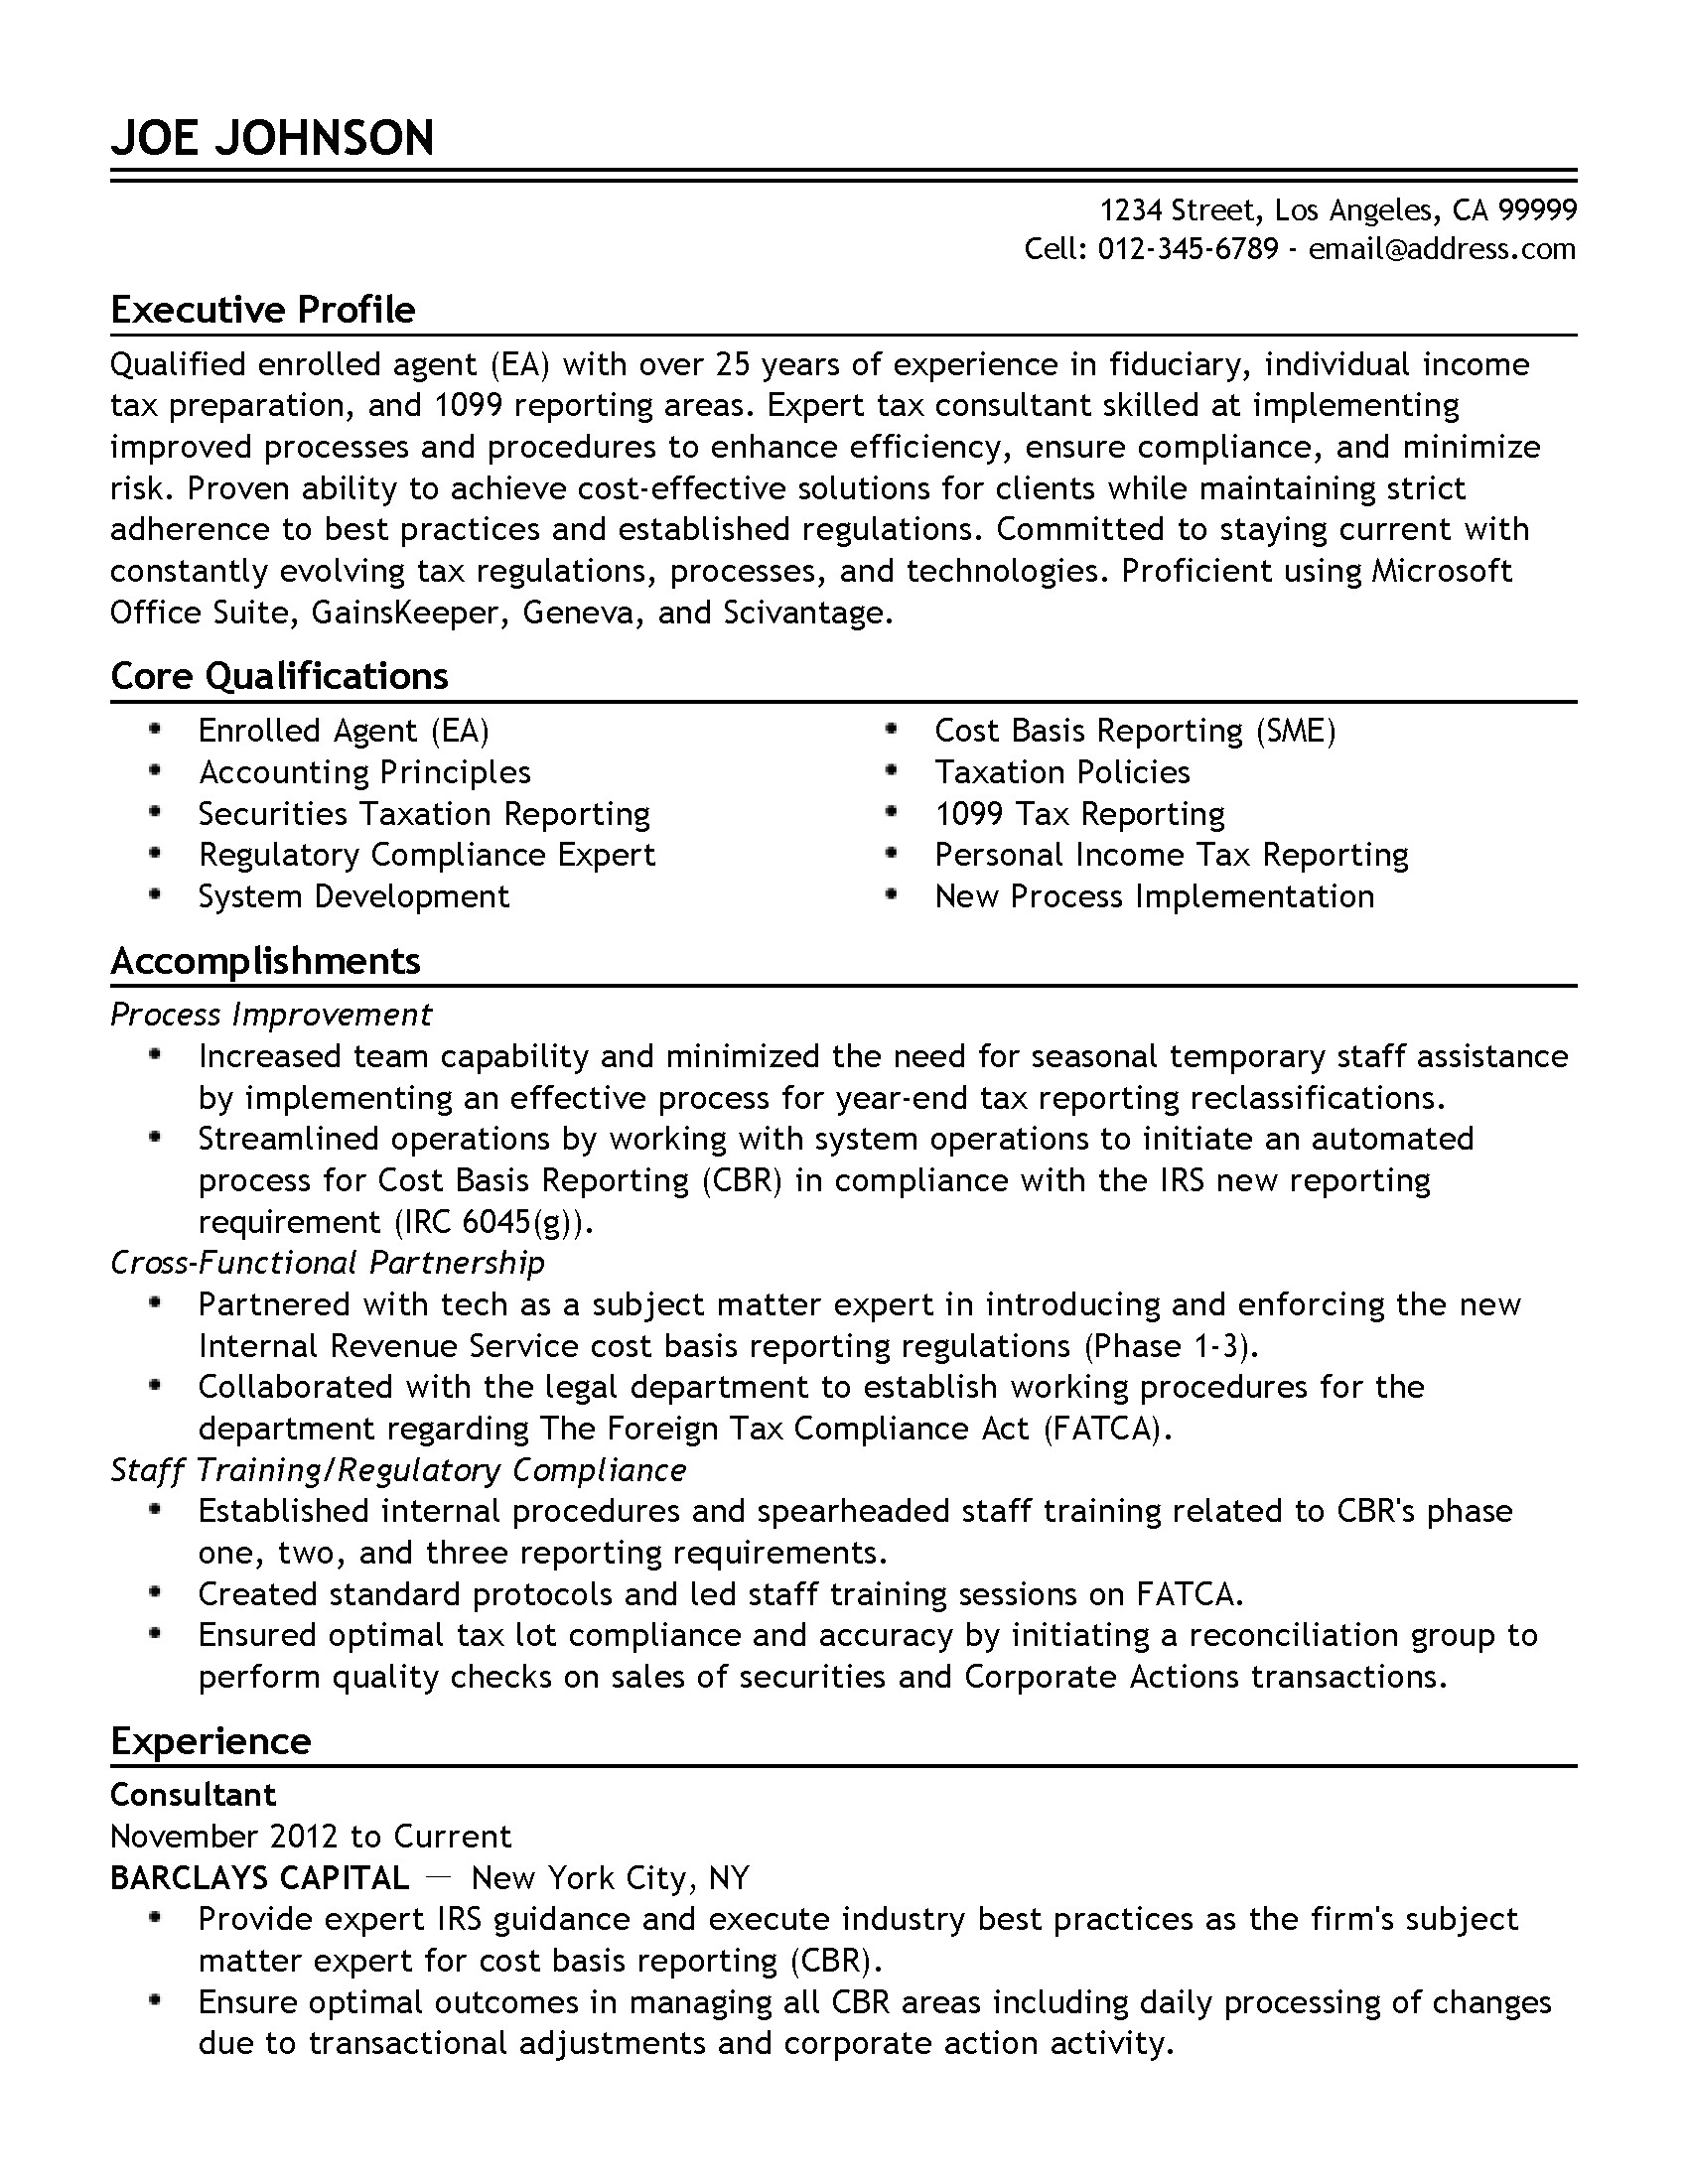 Enrolled Agent Resume Sample Professional Enrolled Agent Templates to Showcase Your